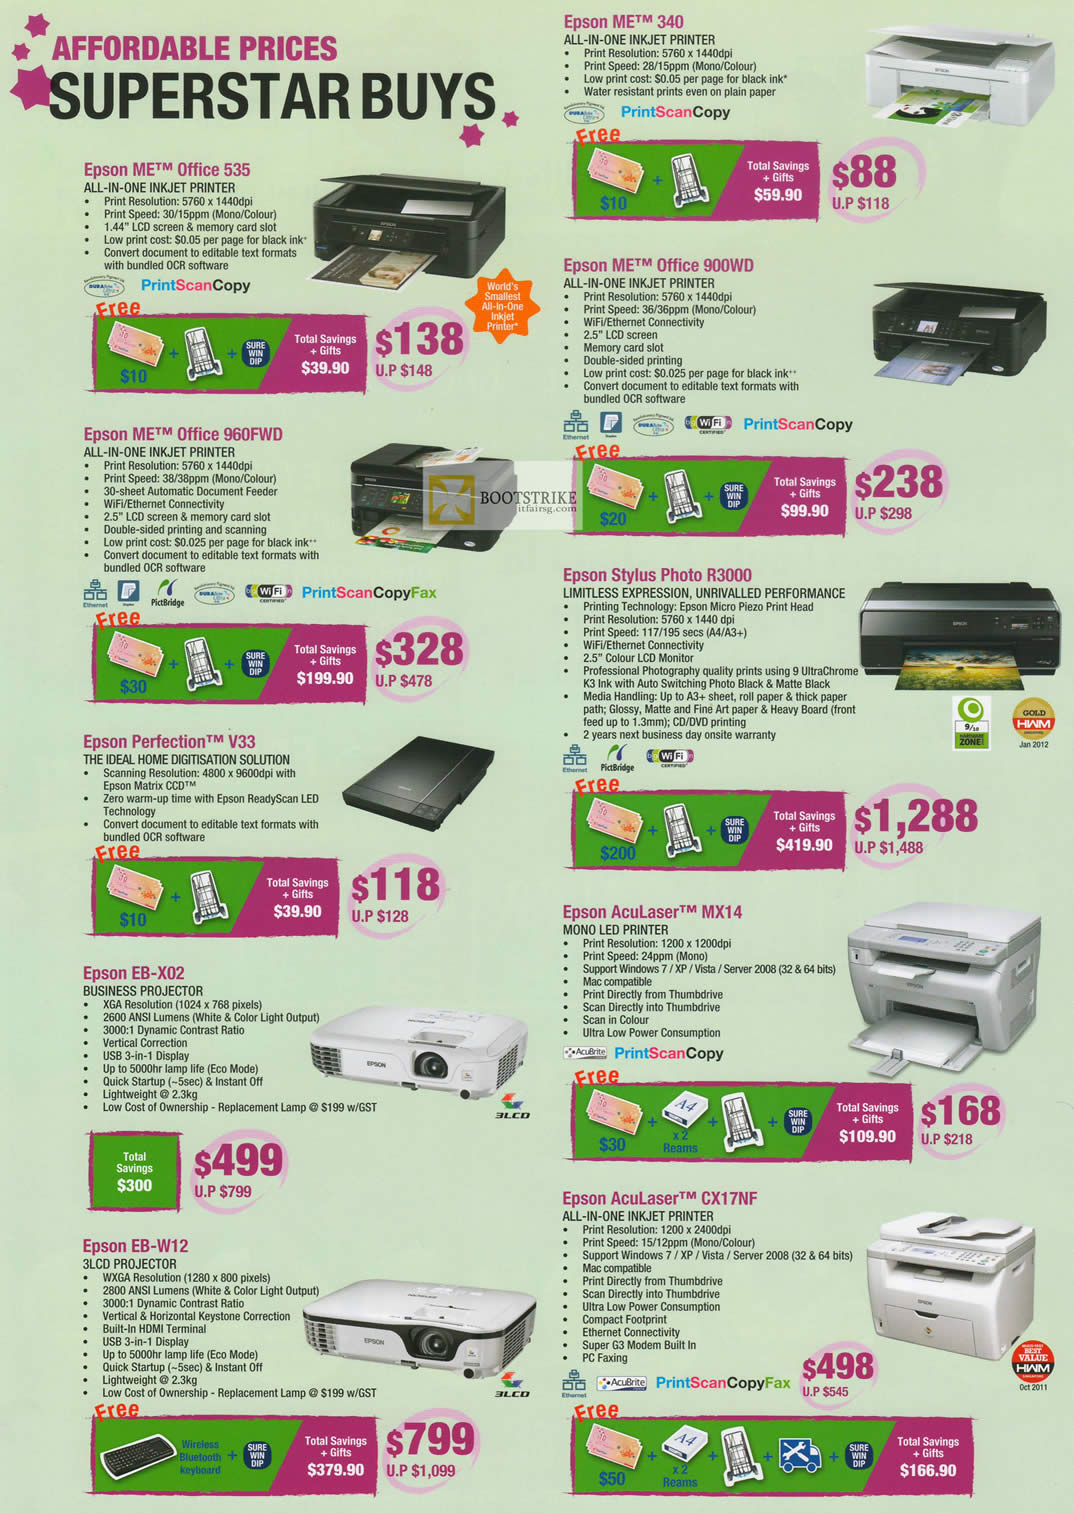 IT SHOW 2012 price list image brochure of Epson Printers Inkjet ME Office 535, 340, 960FWD, 900WD, Stylus Photo R3000, Scanner Perfection V33, EB-X02, AcuLaster MX14, CX17NF, Projector EB-W12